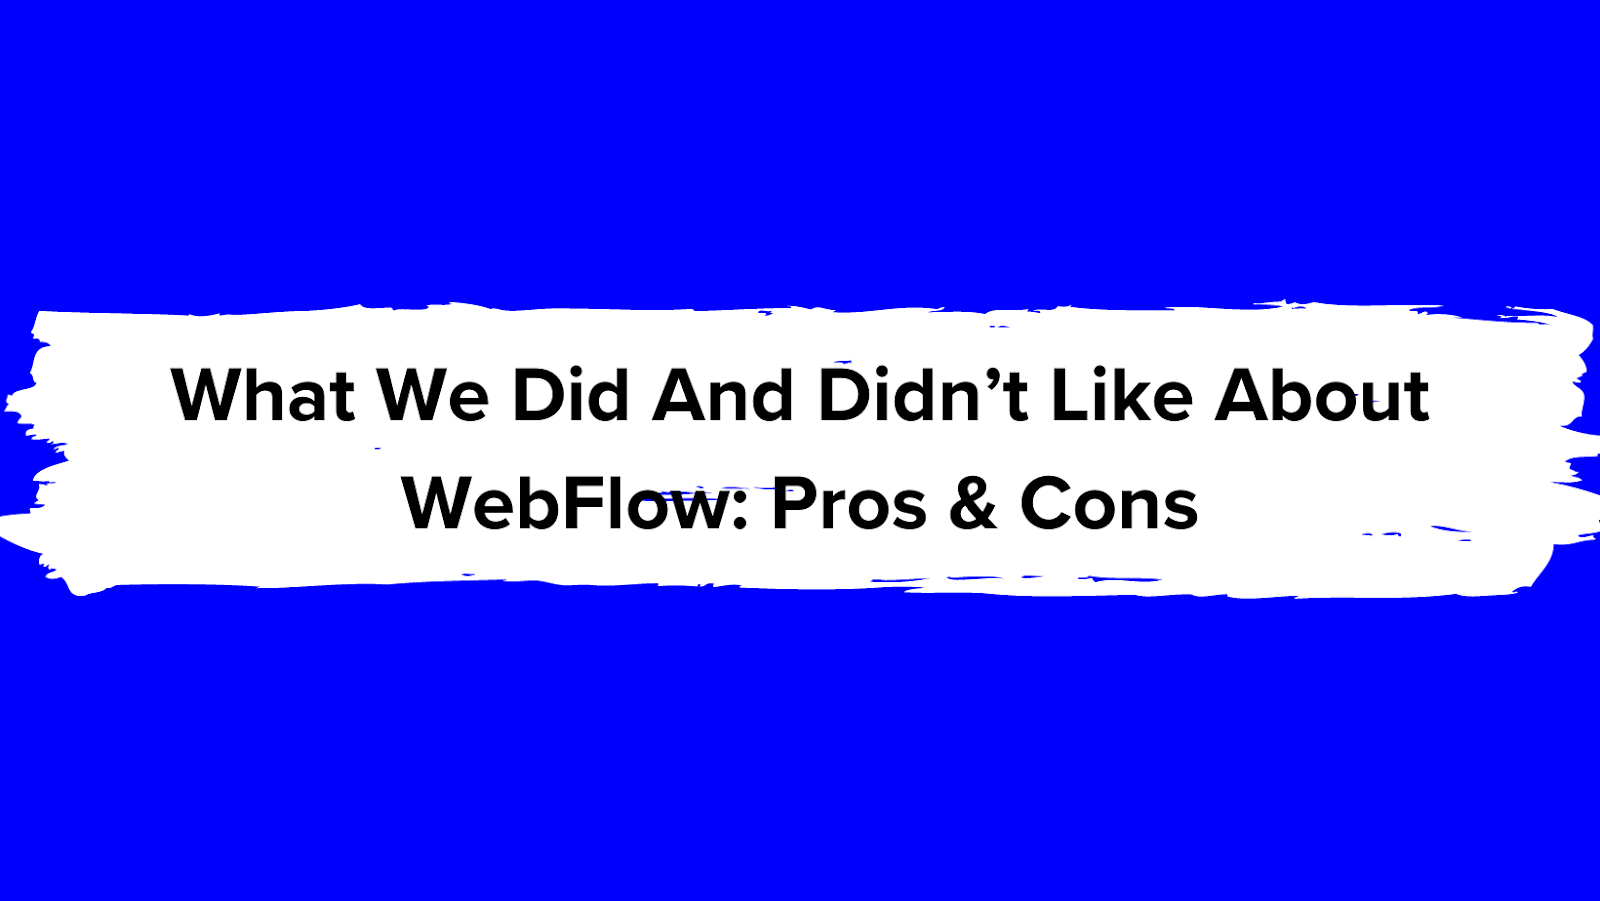 What We Did And Didn’t Like About WebFlow: Pros & Cons